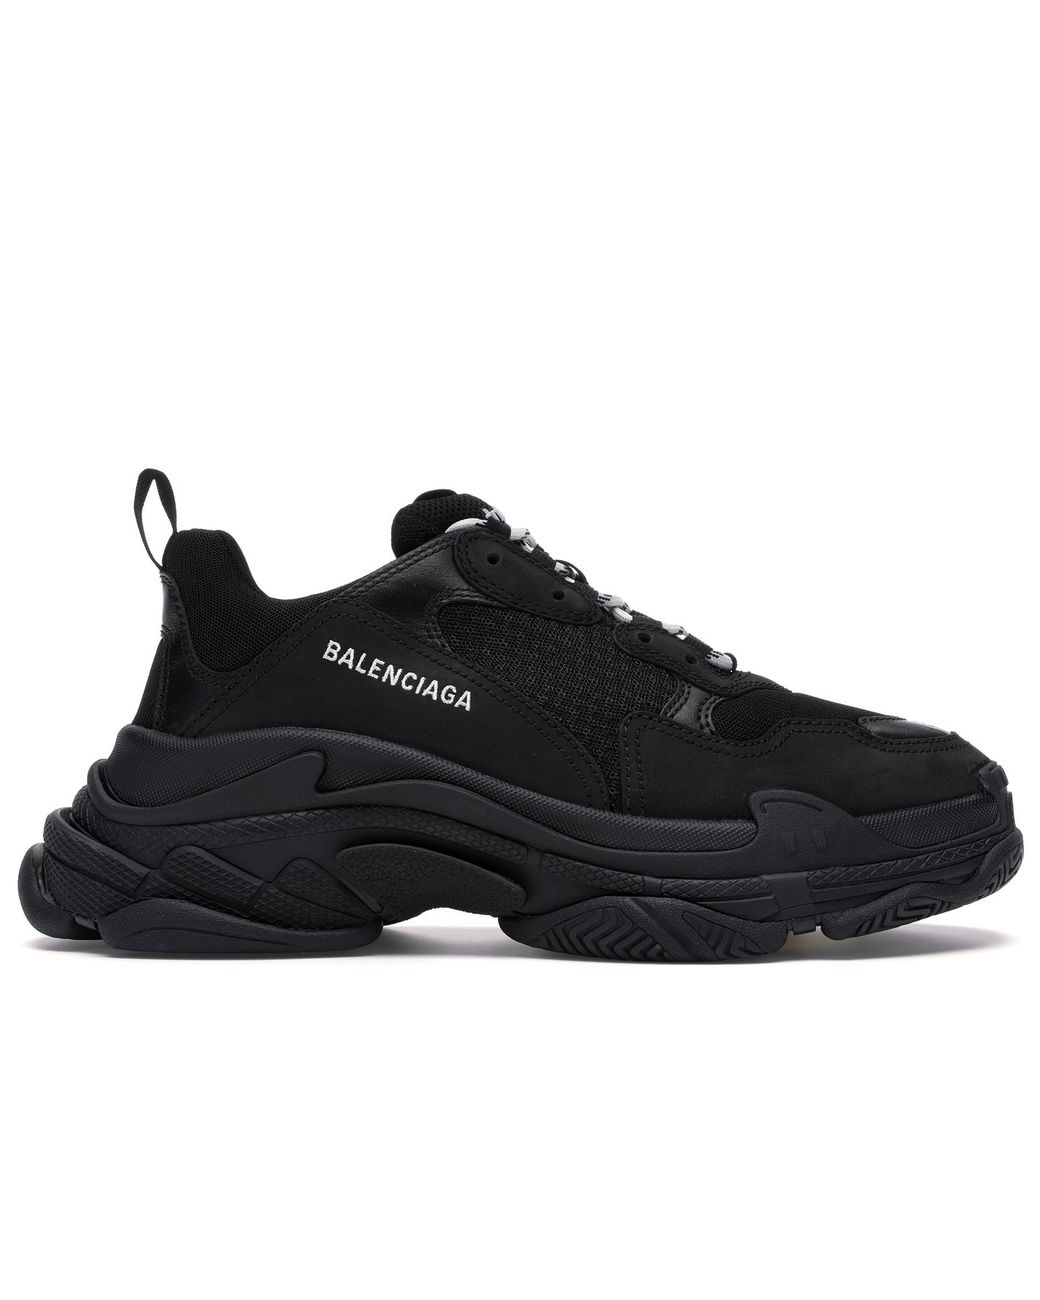 Balenciaga Leather Black Triple S Sneakers for Men - Save 18% - Lyst